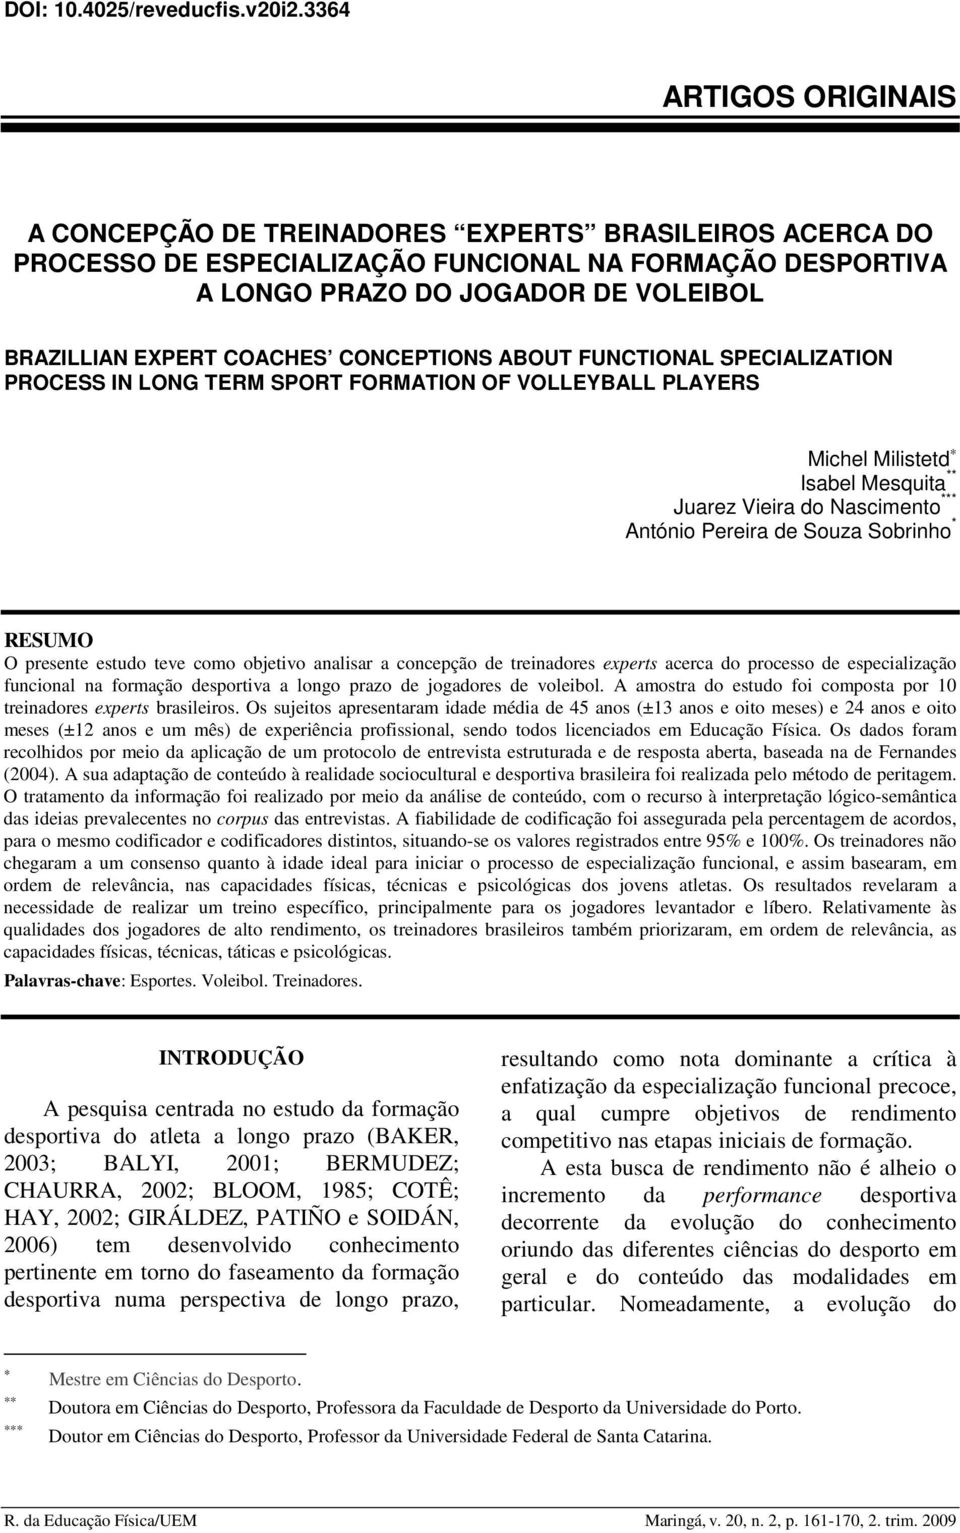 COACHES CONCEPTIONS ABOUT FUNCTIONAL SPECIALIZATION PROCESS IN LONG TERM SPORT FORMATION OF VOLLEYBALL PLAYERS Michel Milistetd Isabel Mesquita ** Juarez Vieira do Nascimento *** António Pereira de